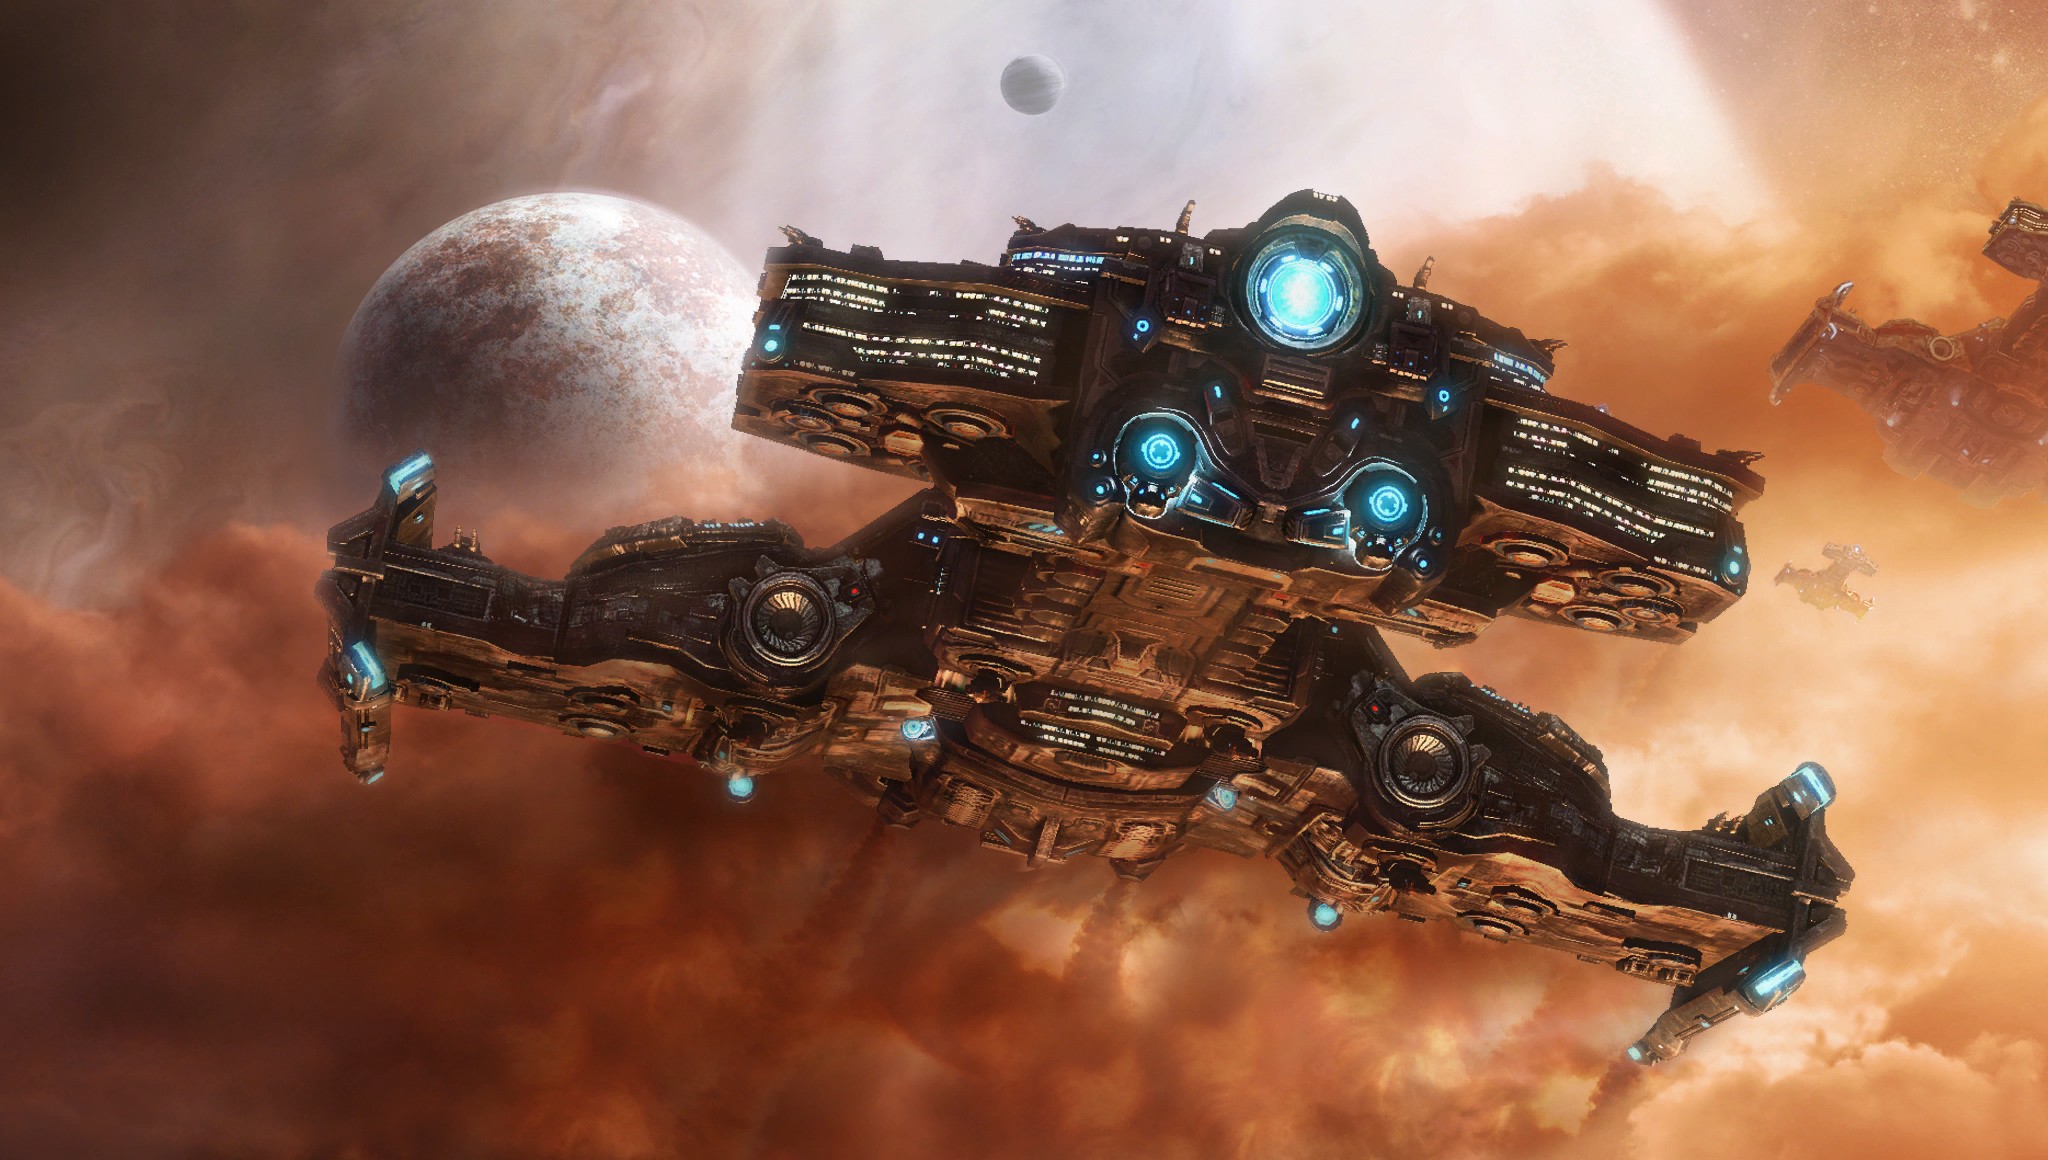 General 2048x1160 spaceship space Starcraft II artwork science fiction StarCraft video games hyperion StarCraft II: Wings of Liberty PC gaming vehicle video game art